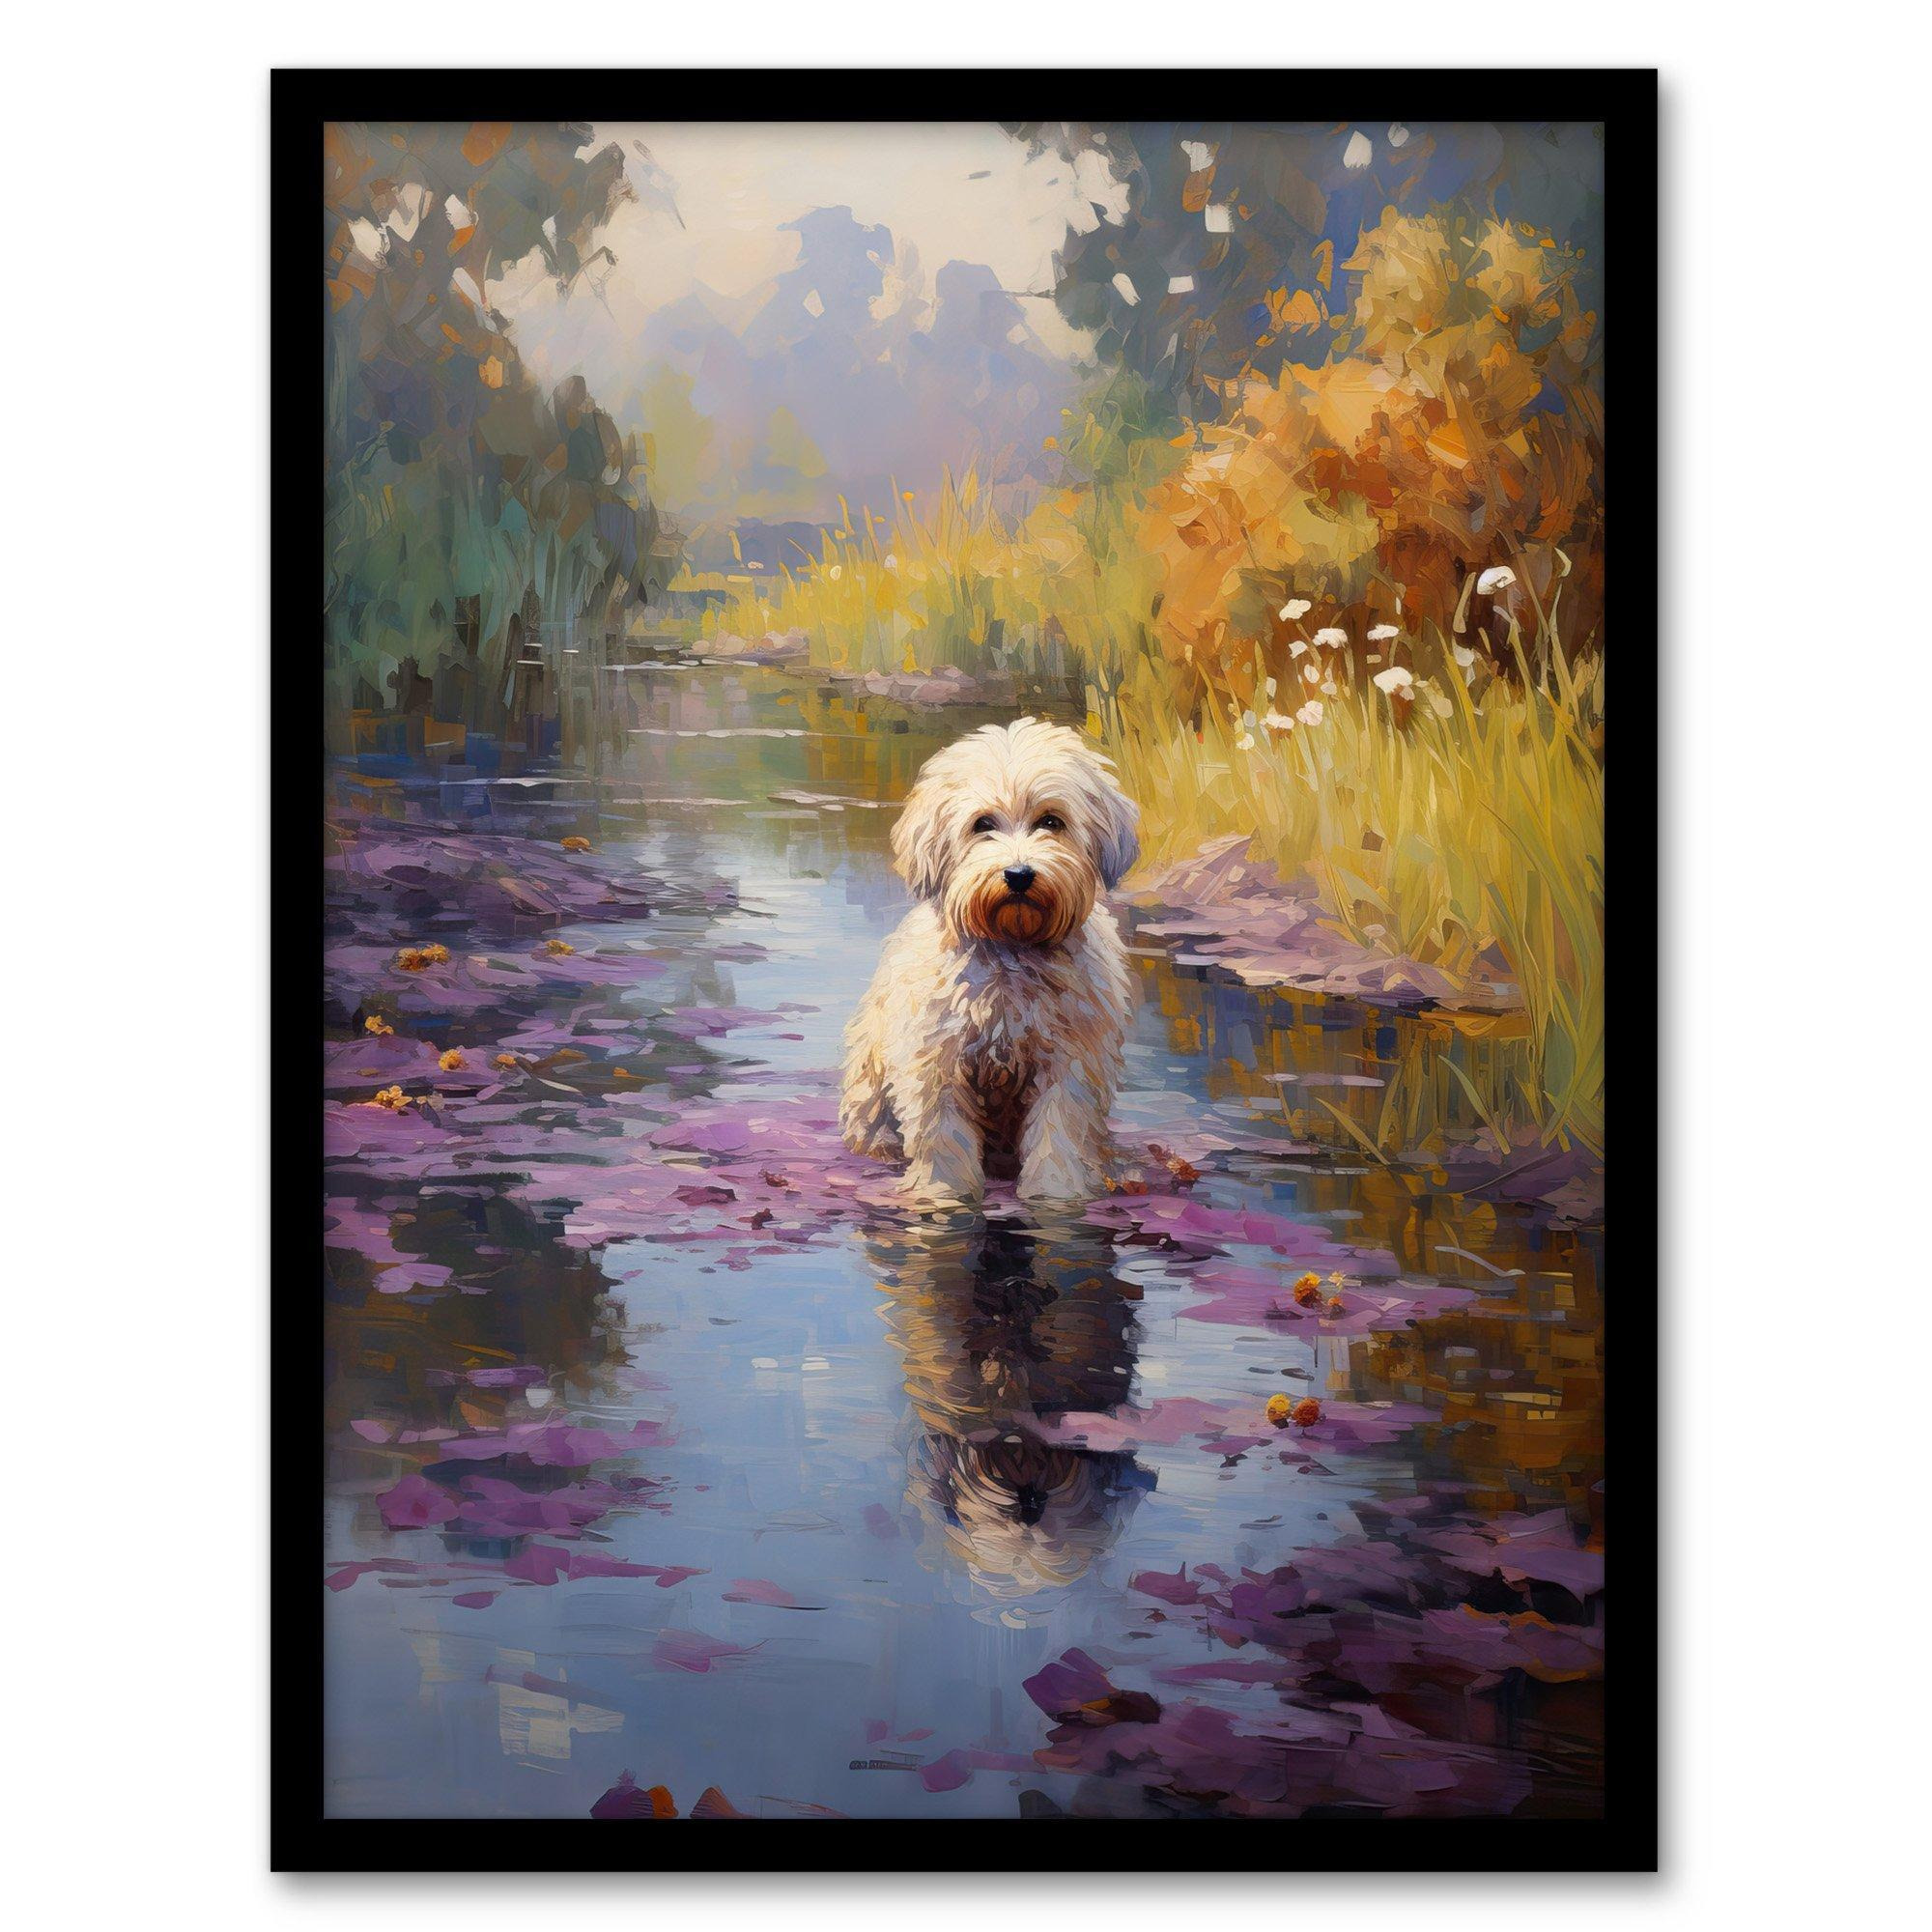 White Cockapoo Dog And Purple Water Irises Claude Monet Style Oil Painting Art Print Framed Poster Wall Decor - image 1